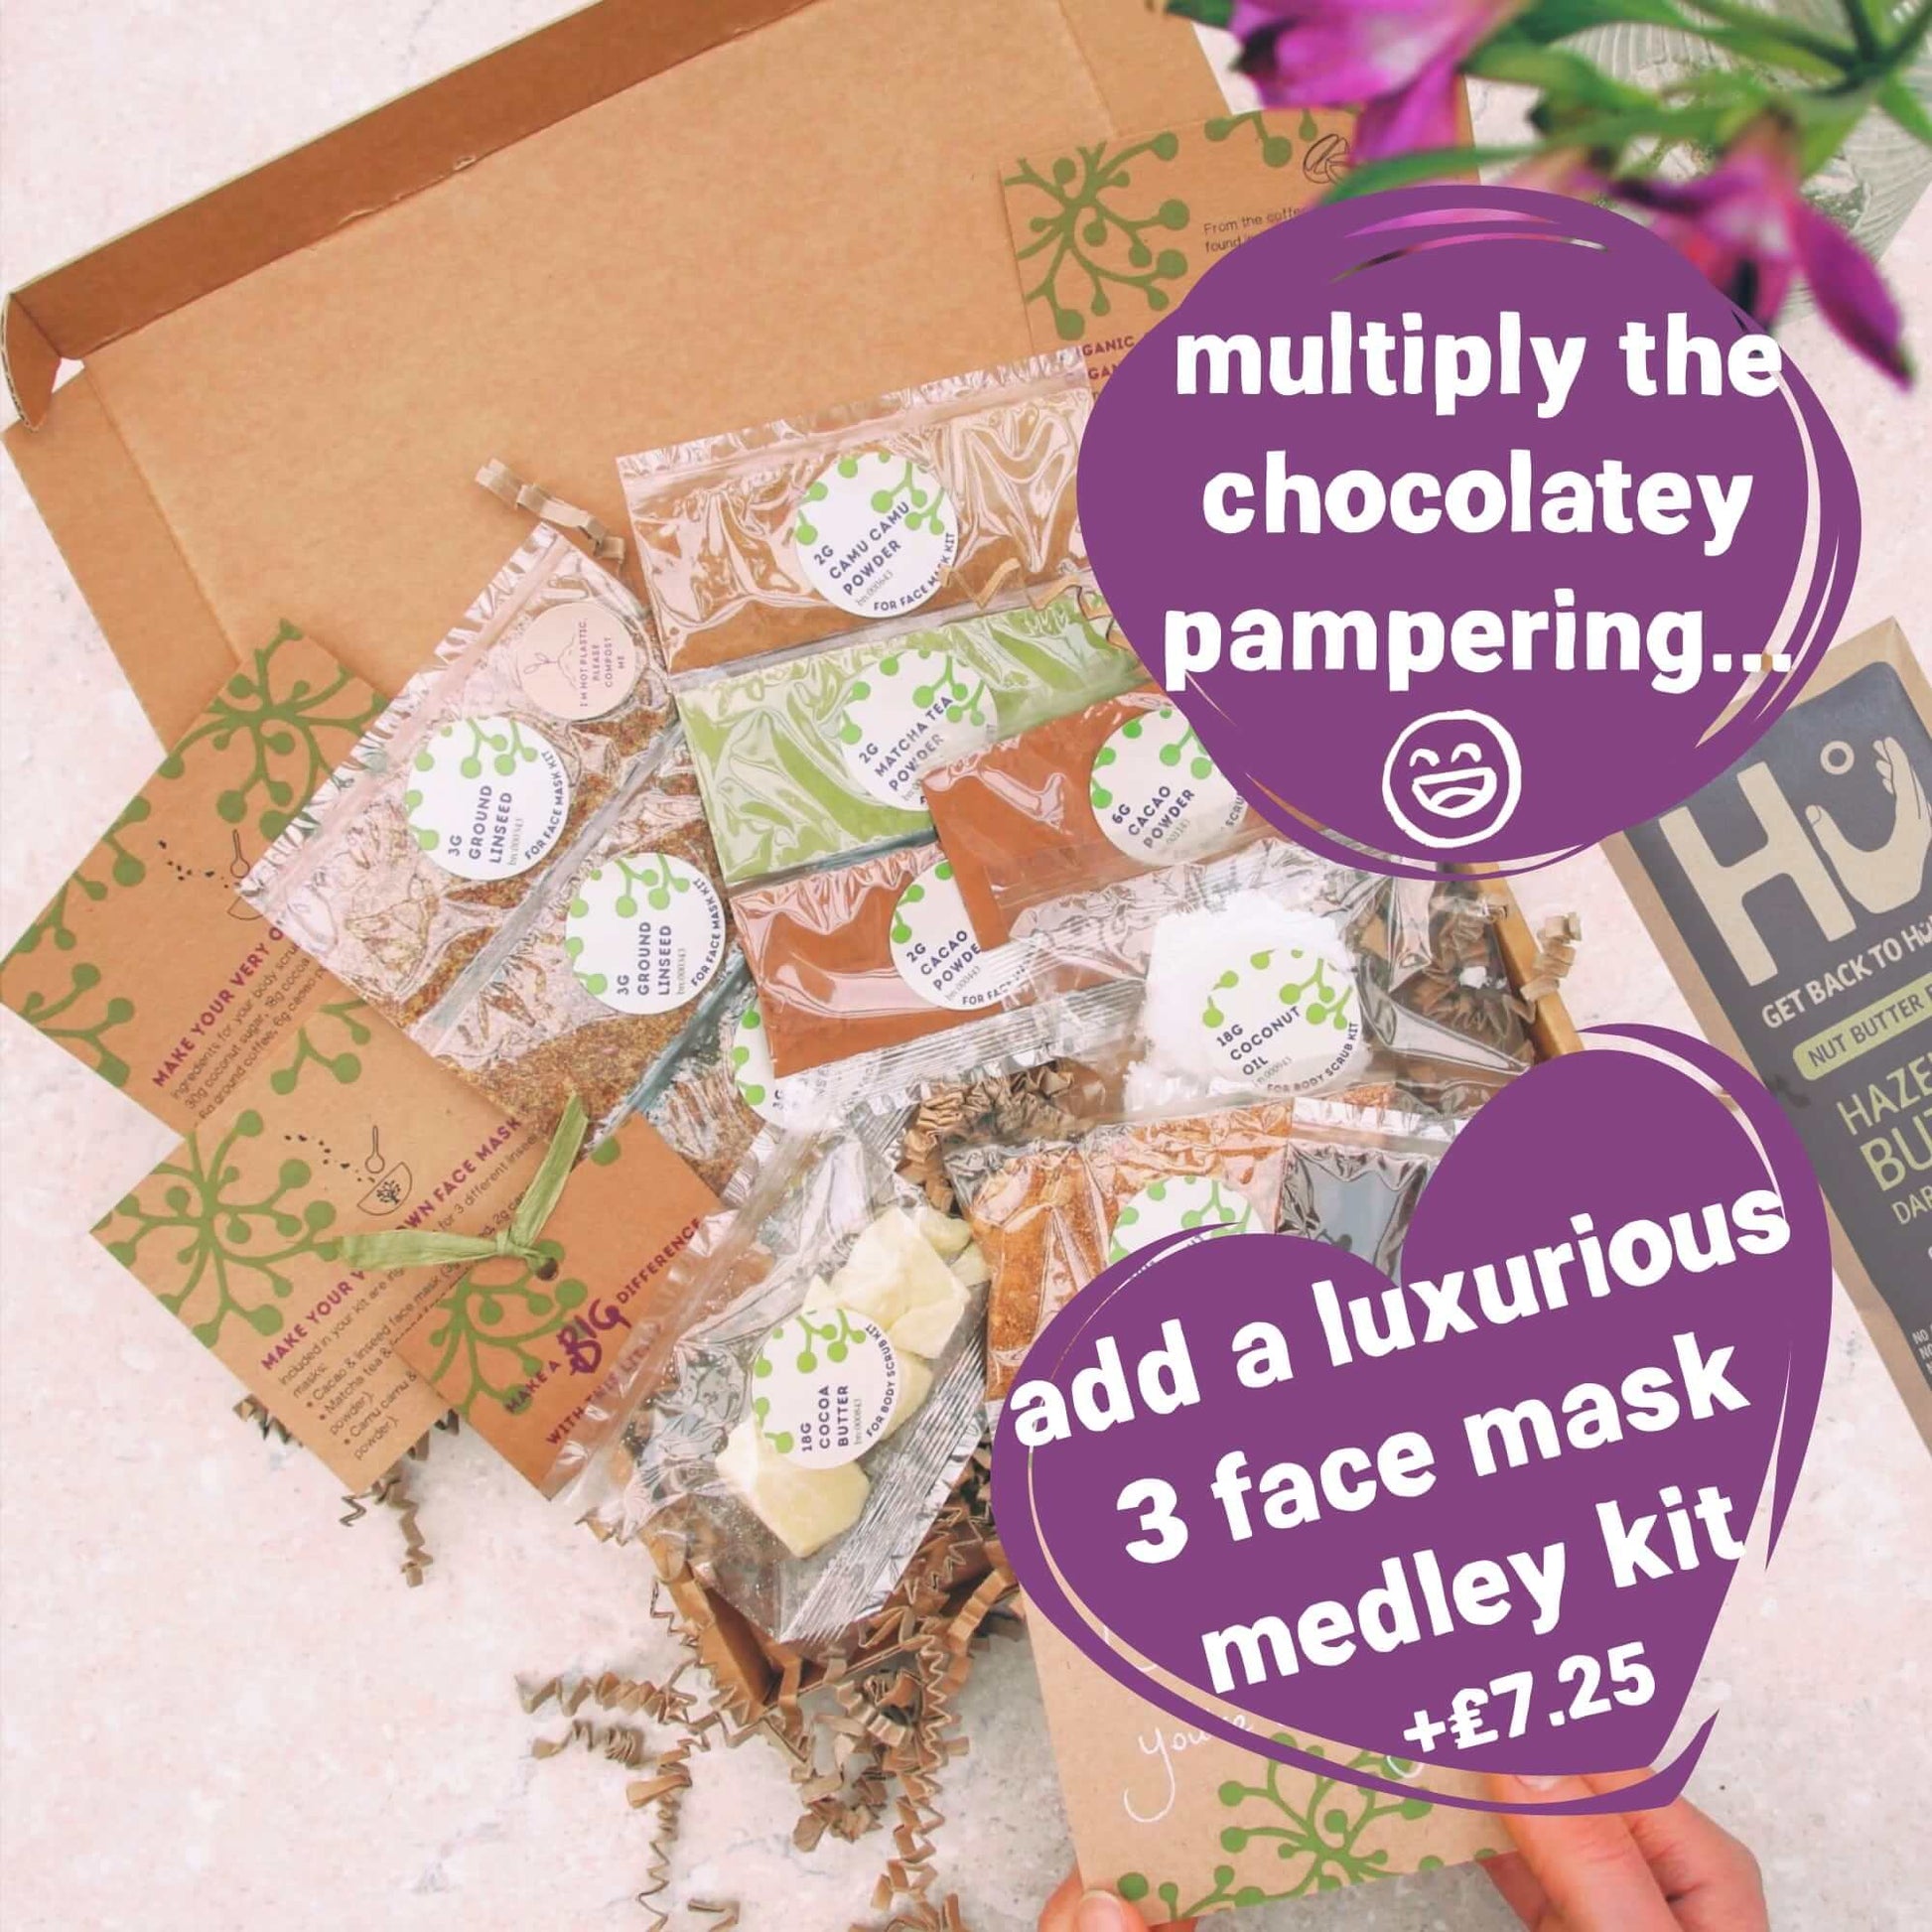 add 3 luxury organic face mask kits to self care letterbox gift